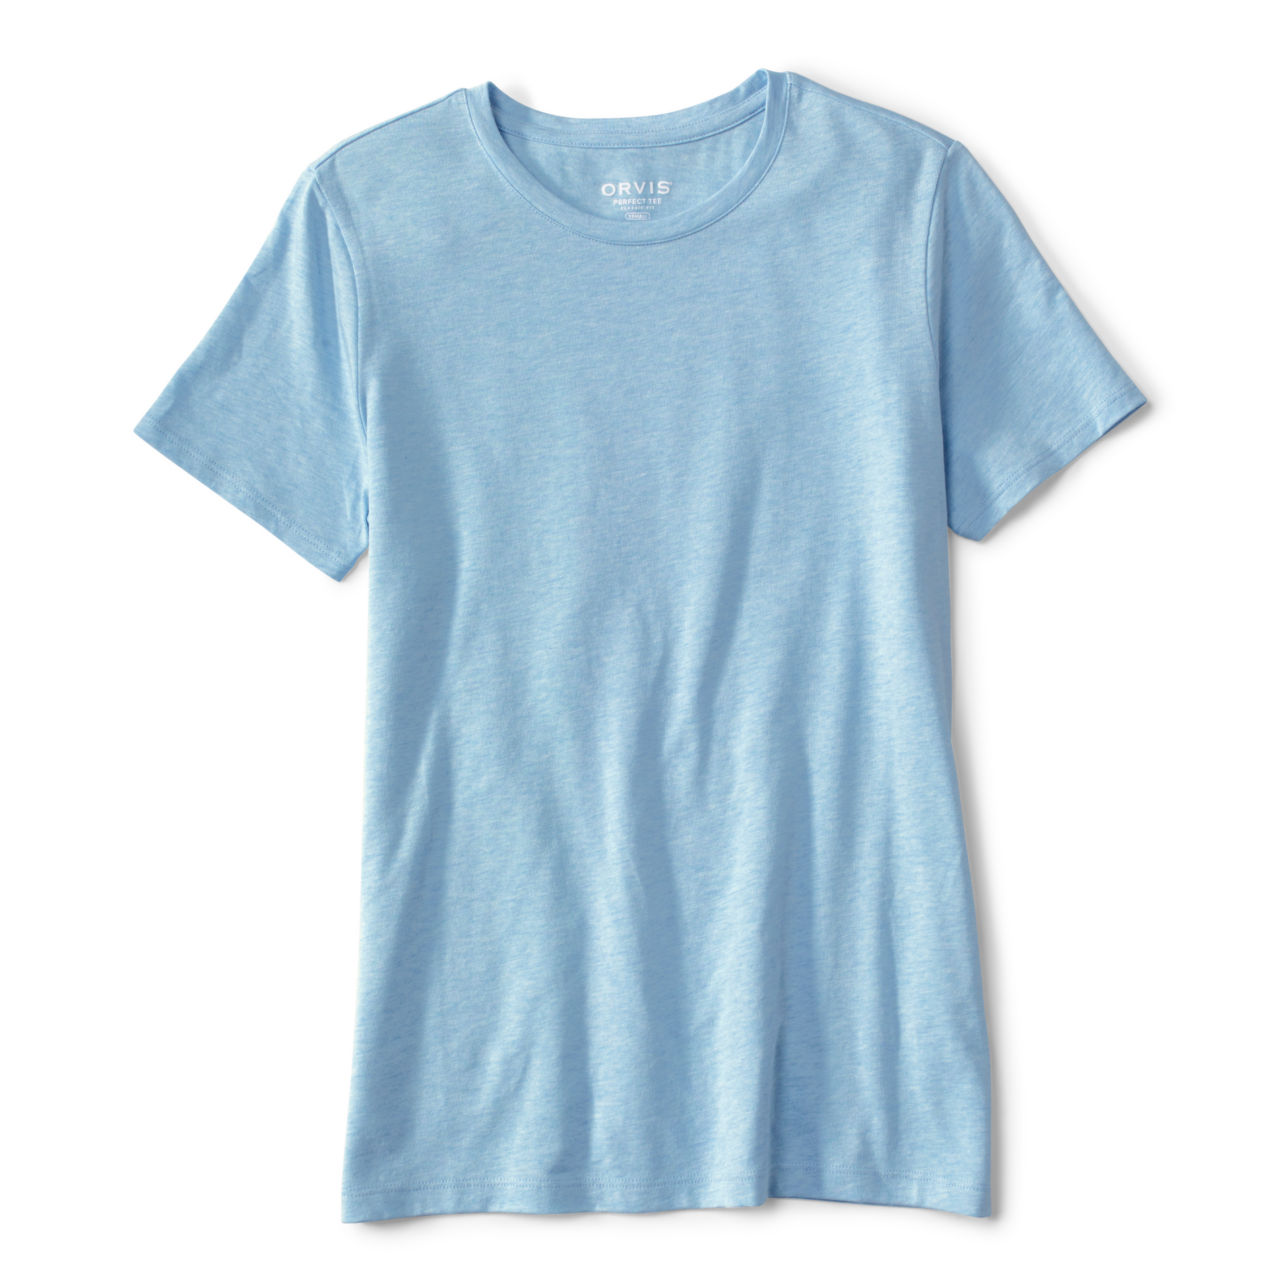 Perfect True Crew Short-Sleeved Tee - CLOUD BLUE HEATHER image number 4